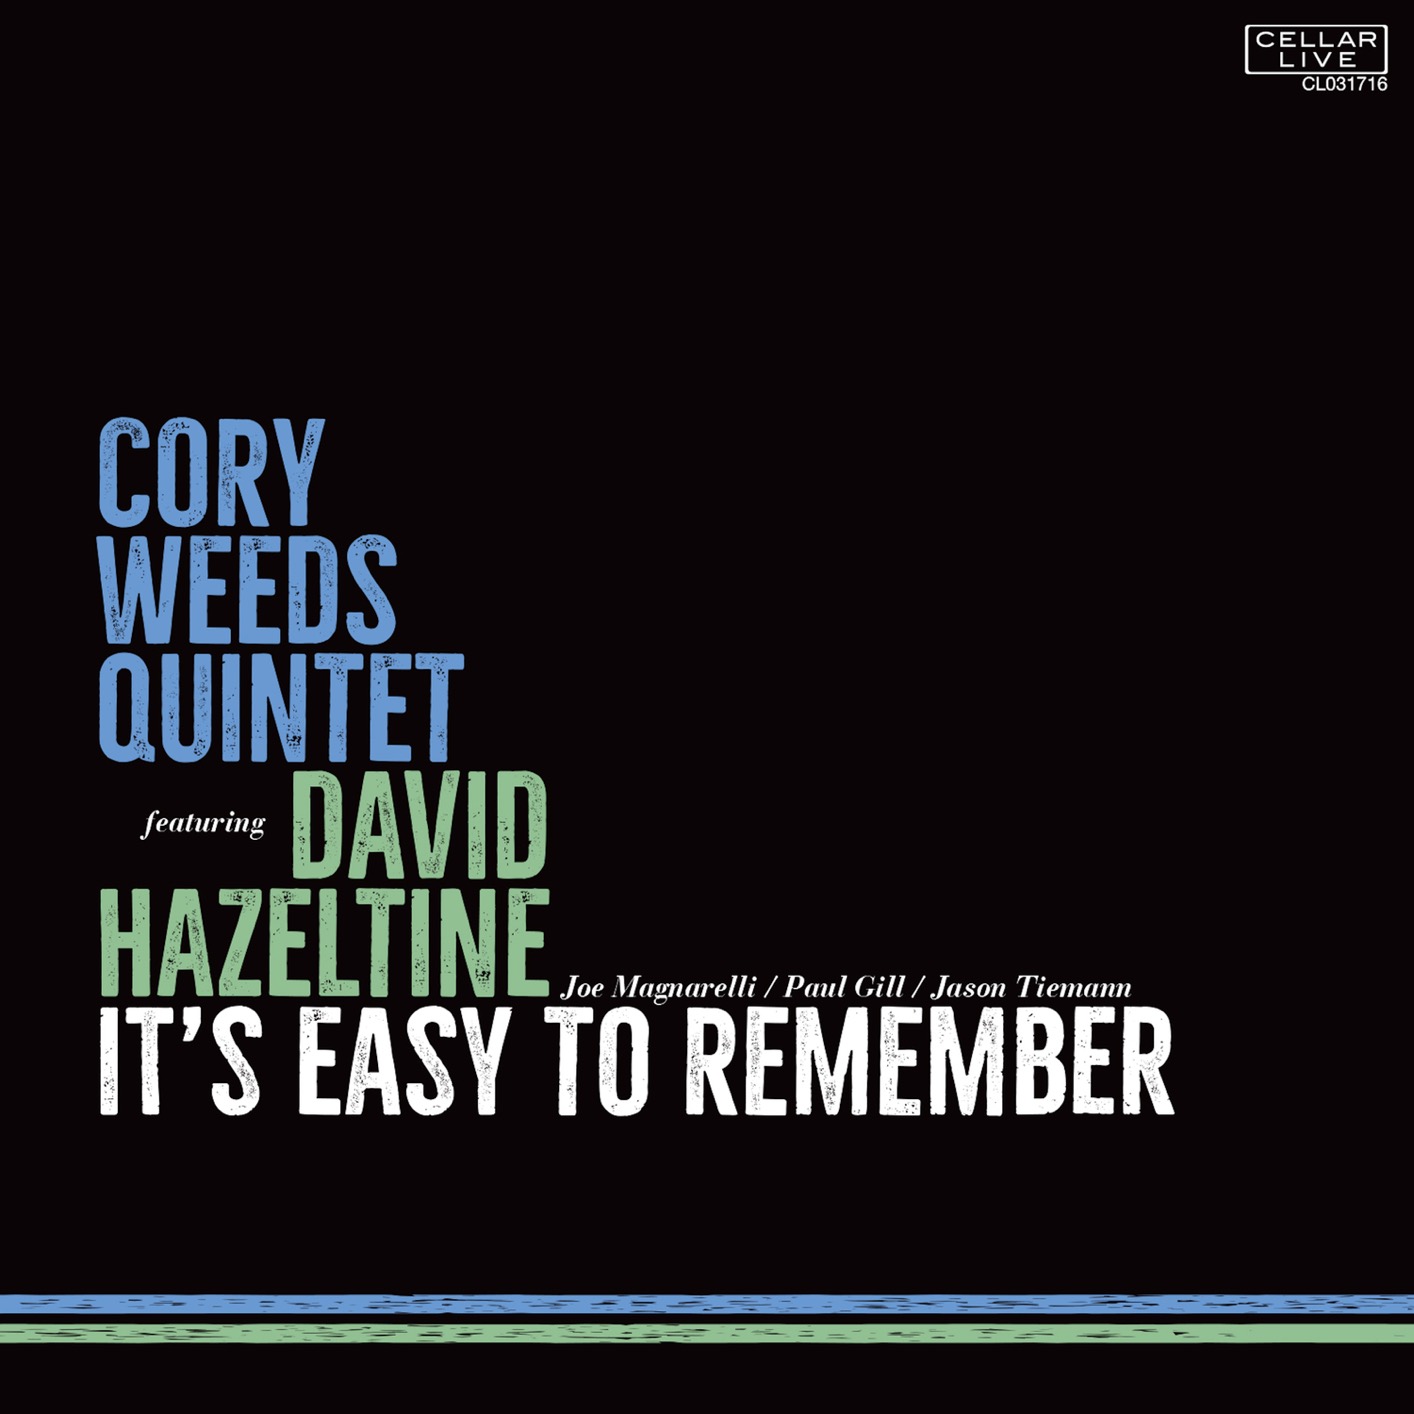 Cory Weeds Quintet - Its Easy to Remember (2016/2020) [FLAC 24bit/96kHz]